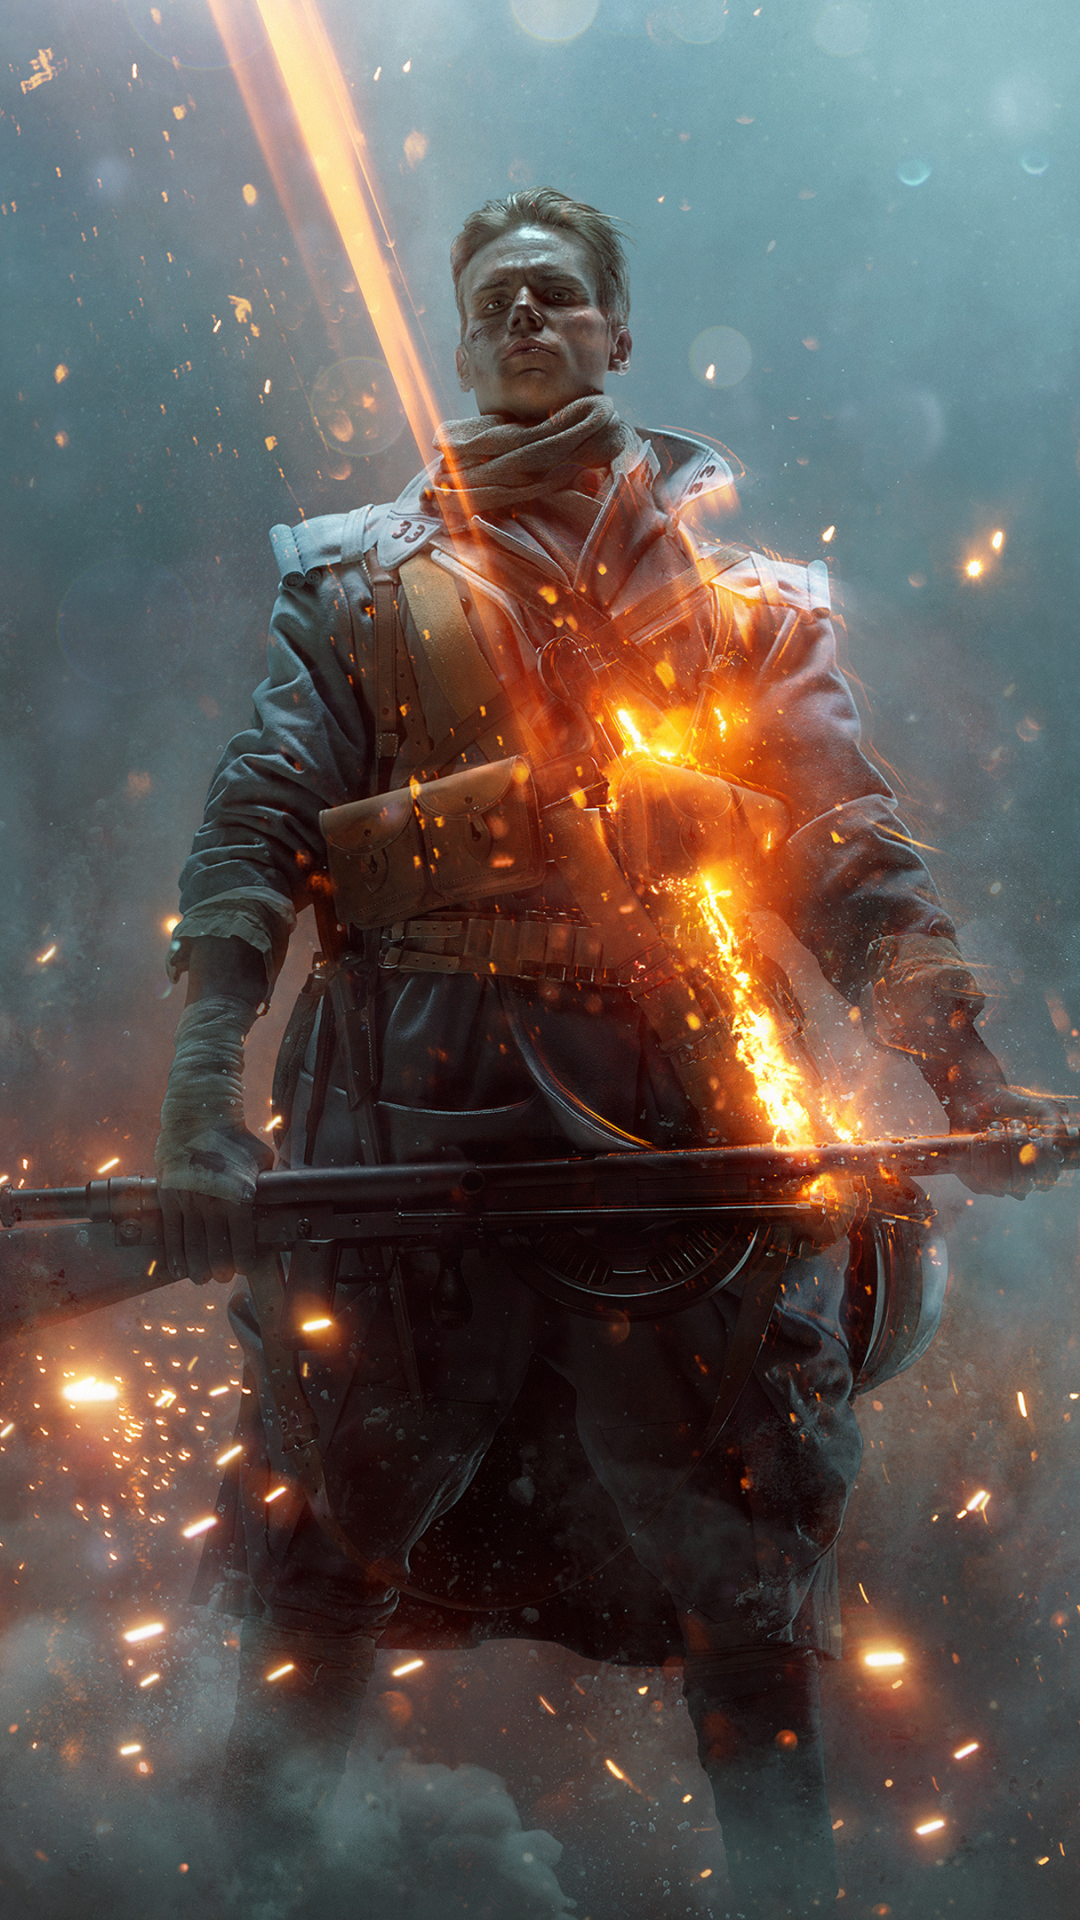 Battlefield 1, They Shall Not Pass, soldier, video game, 2017, 1080x1920 wallpaper